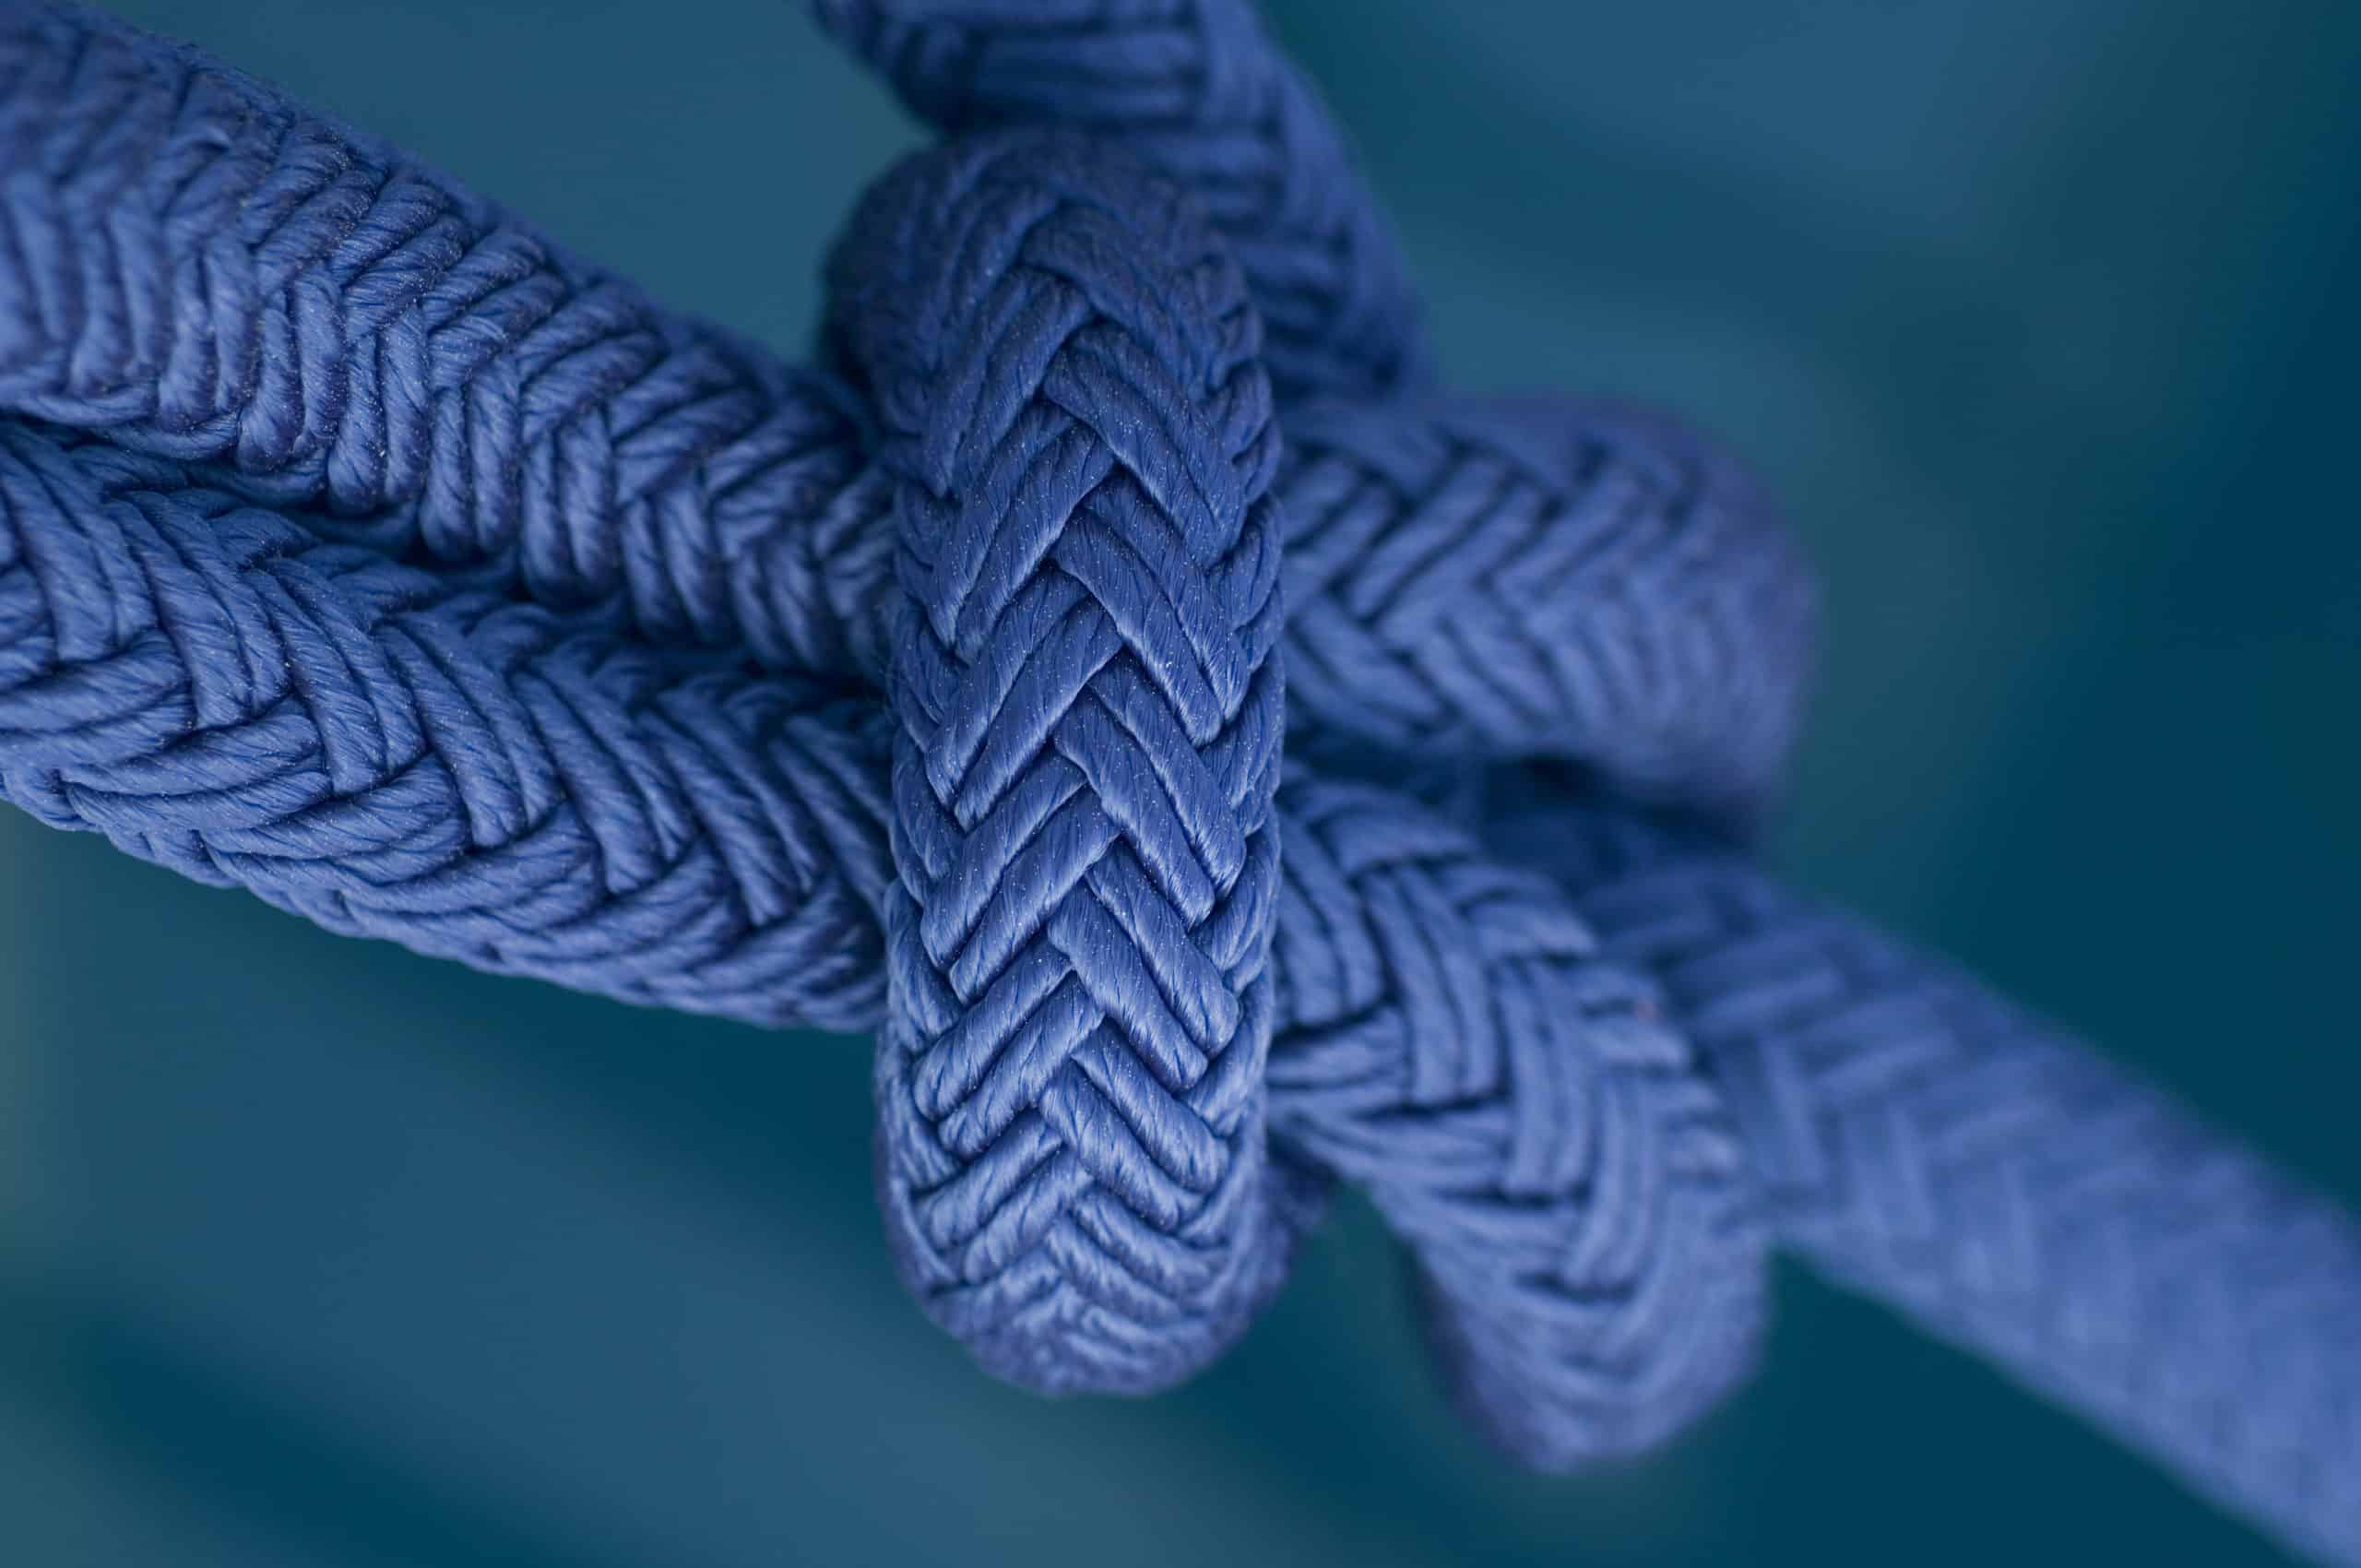 Blue rope tied in a boatman's knob